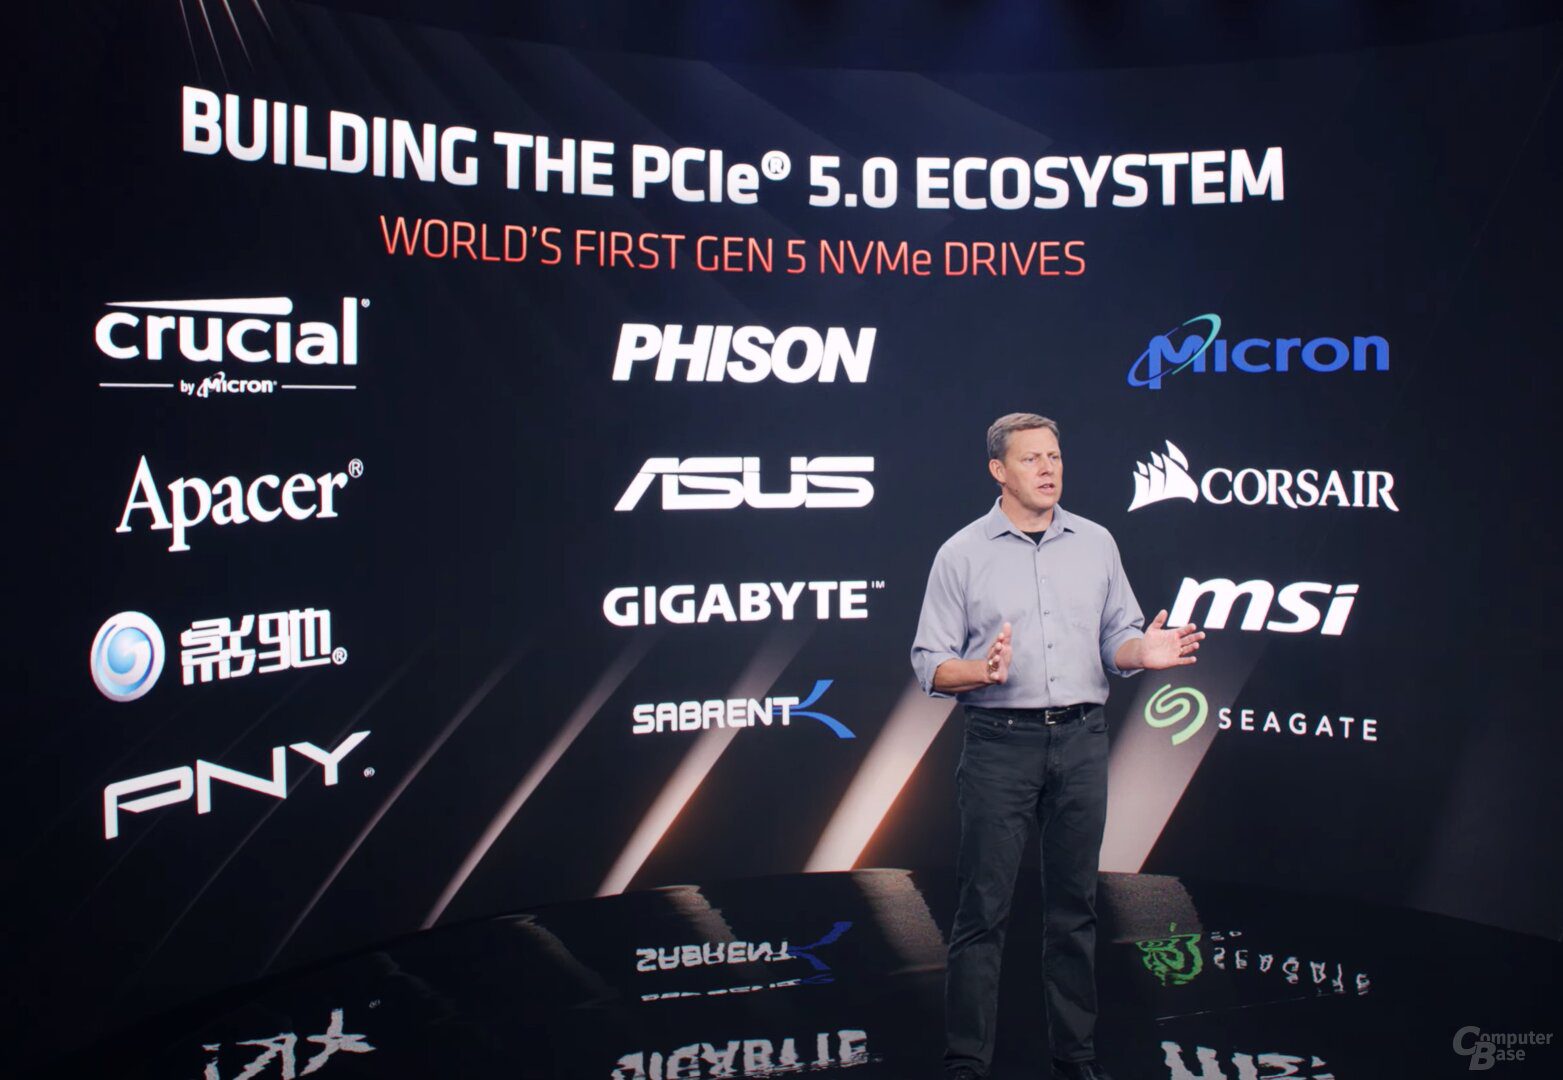 AMD PCIe 5.0 .  Provides platform for new NVMe SSDs with